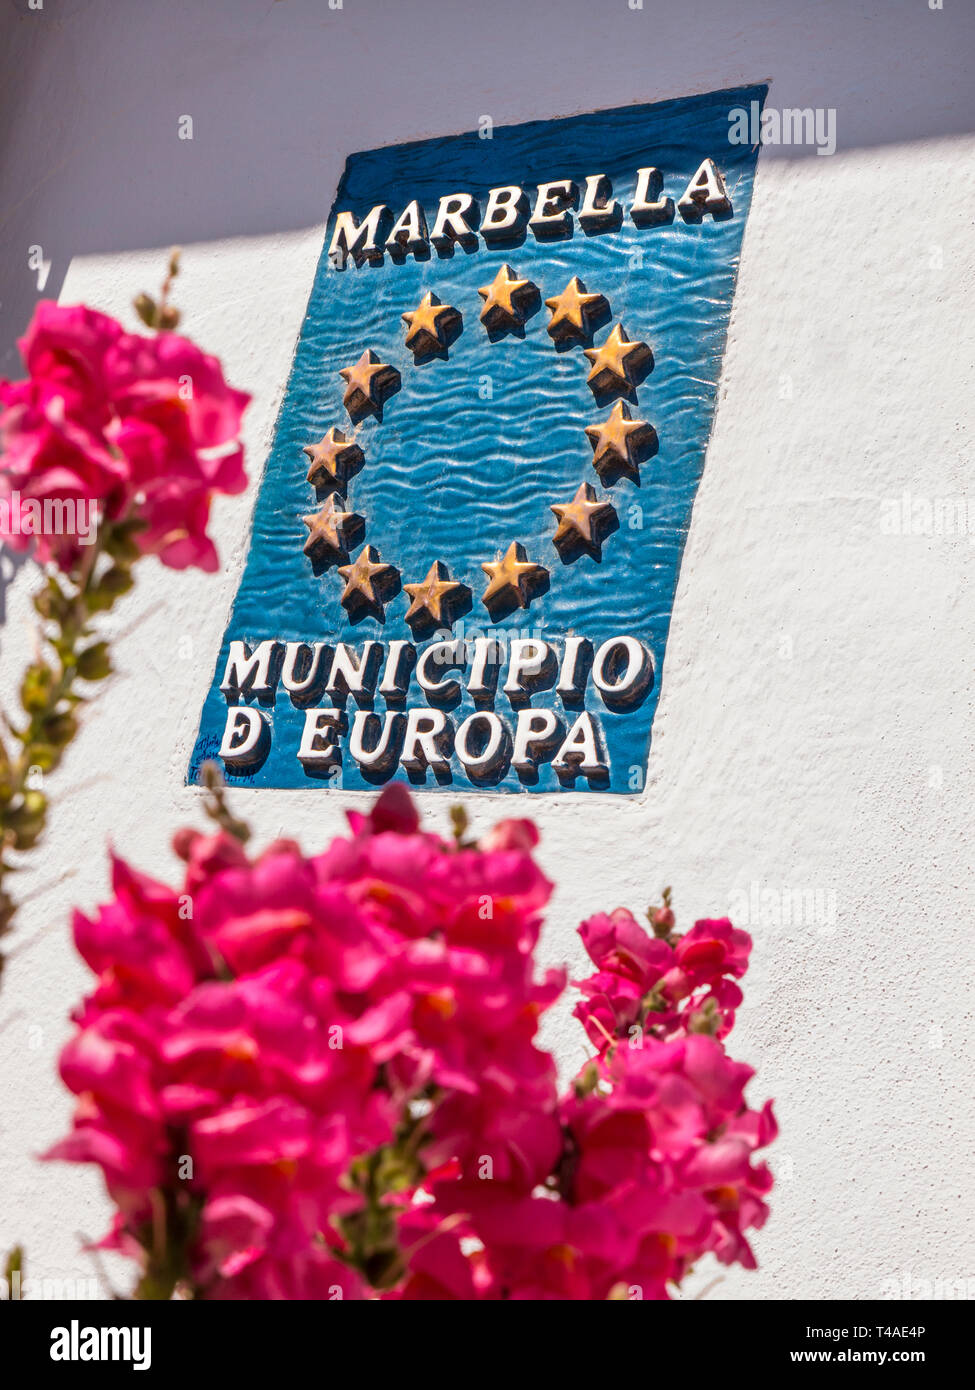 Marbella floral ’Municipio d Europa’ with EU stars, a wall plaque sign for Europe EU 'Stock' Matthiola incana flowers in foreground Marbella Stock Photo